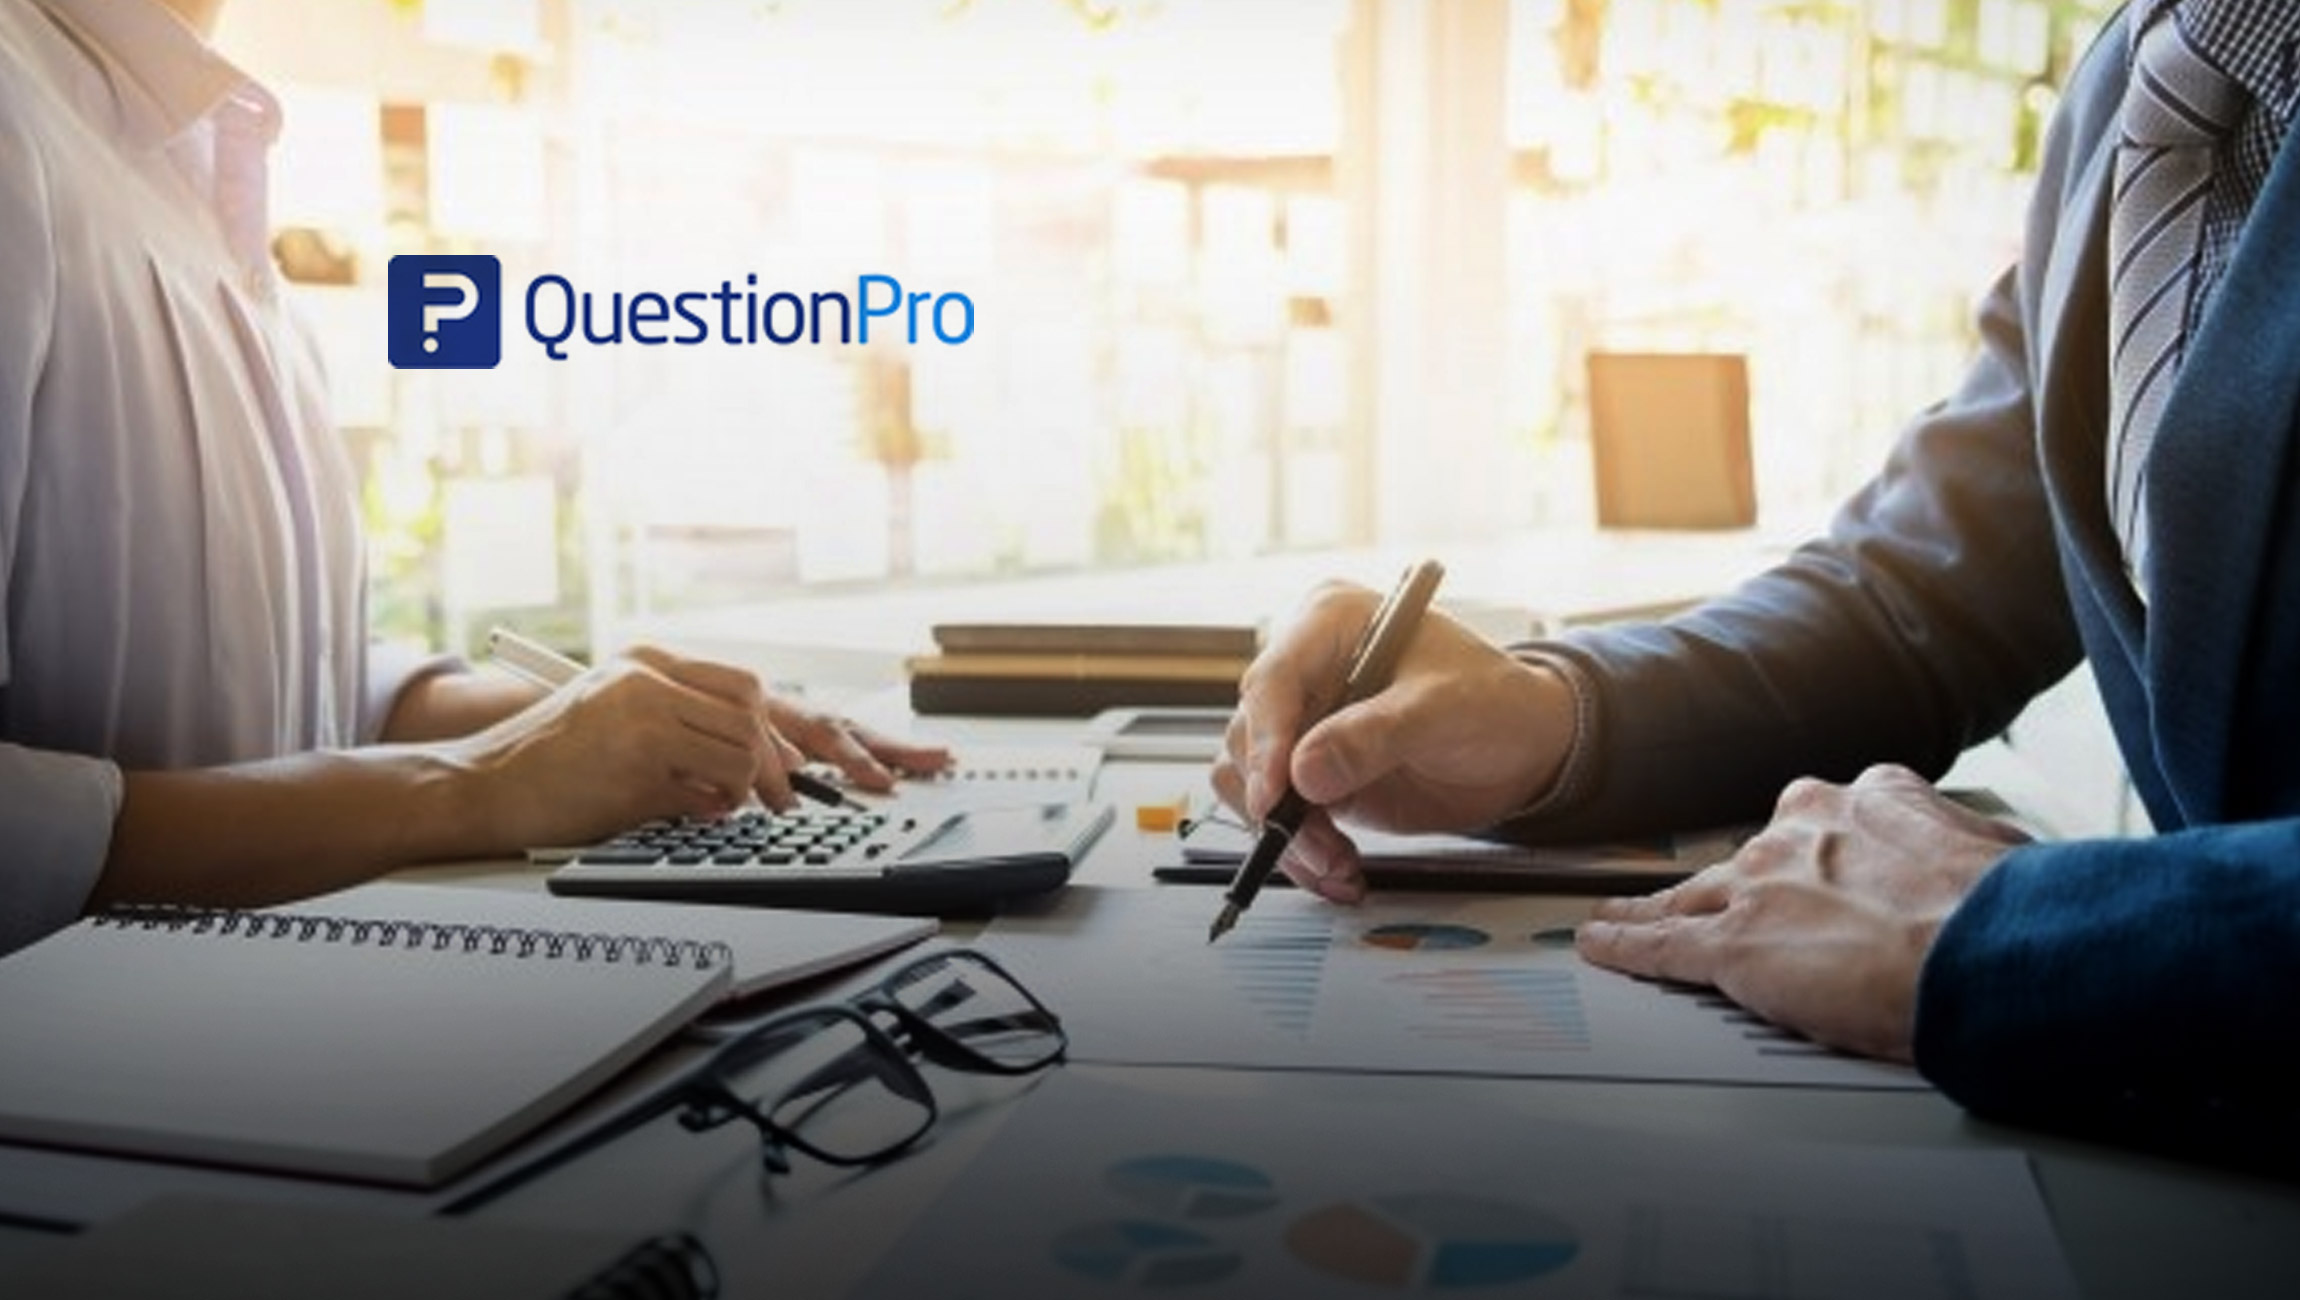 20-facts-about-questionpro